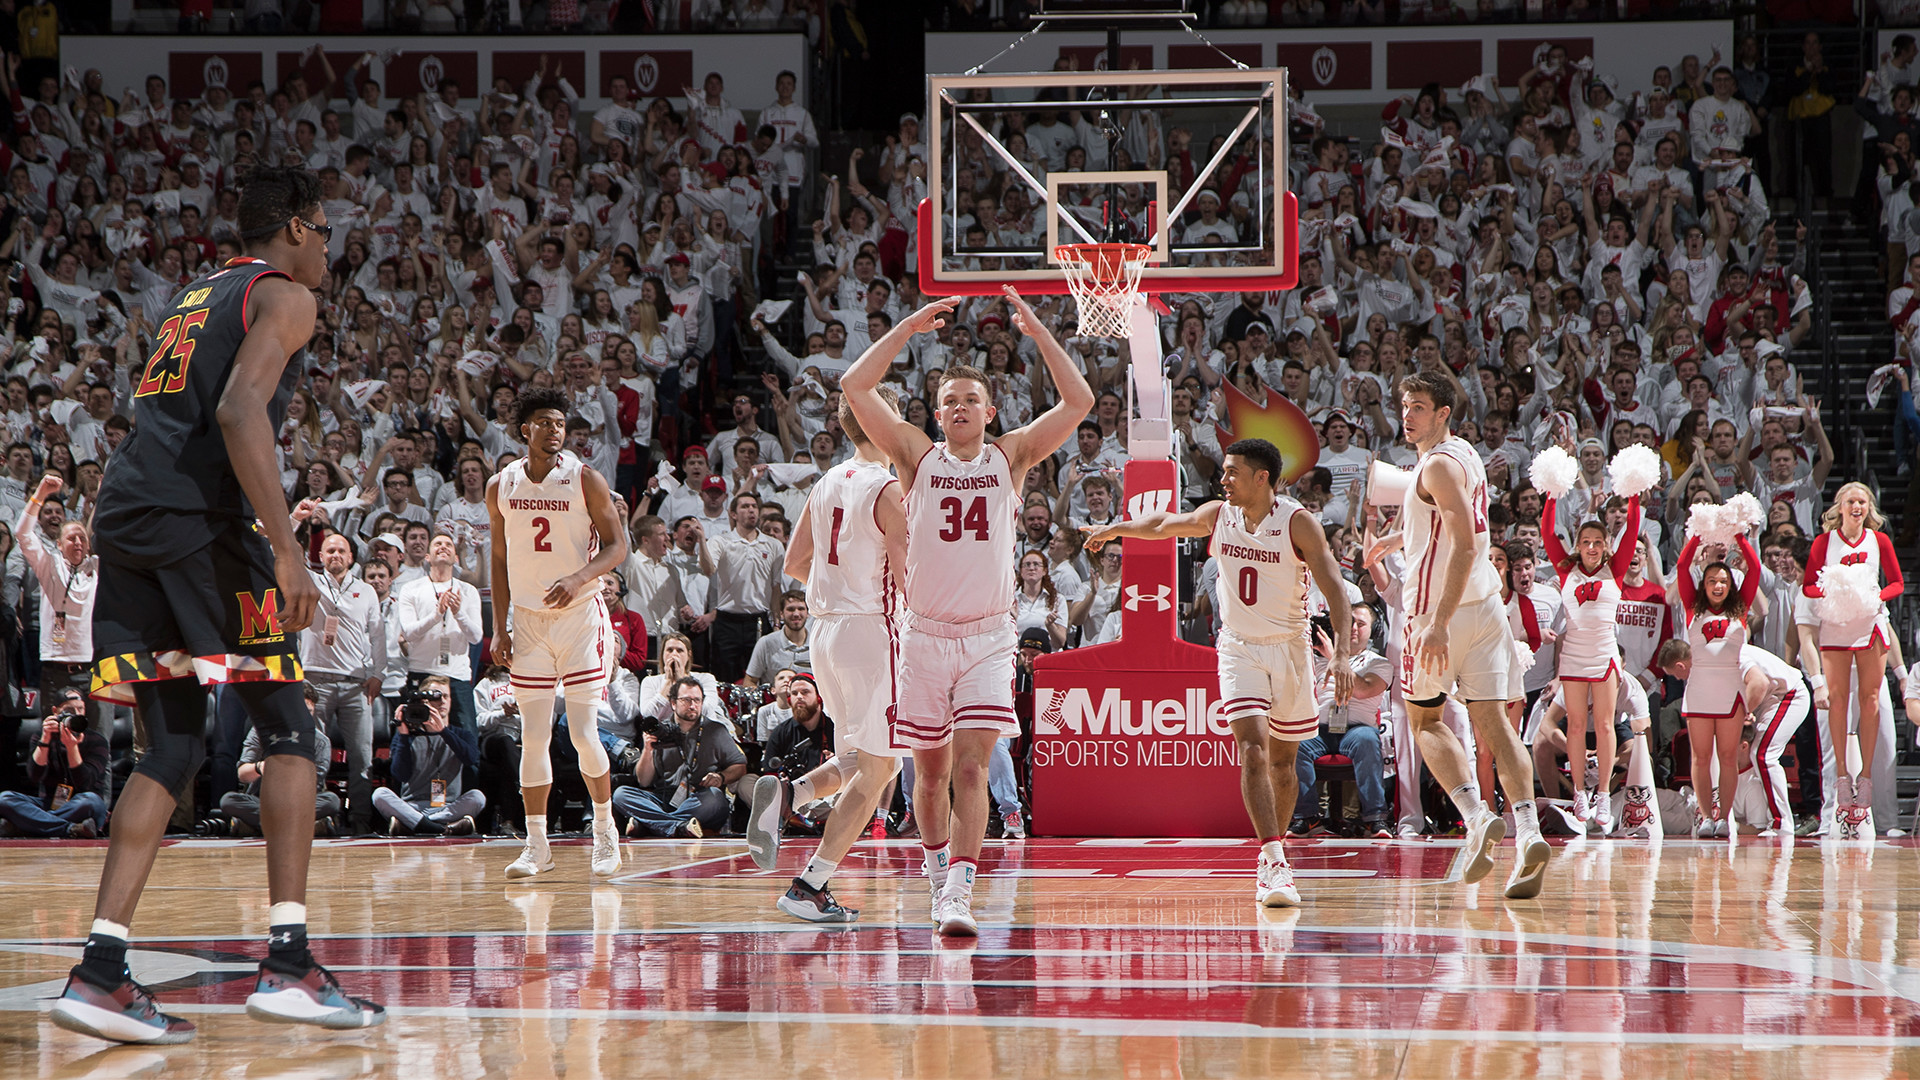 1920x1080 Brad Davison pumps up the crowd during a game against Maryland